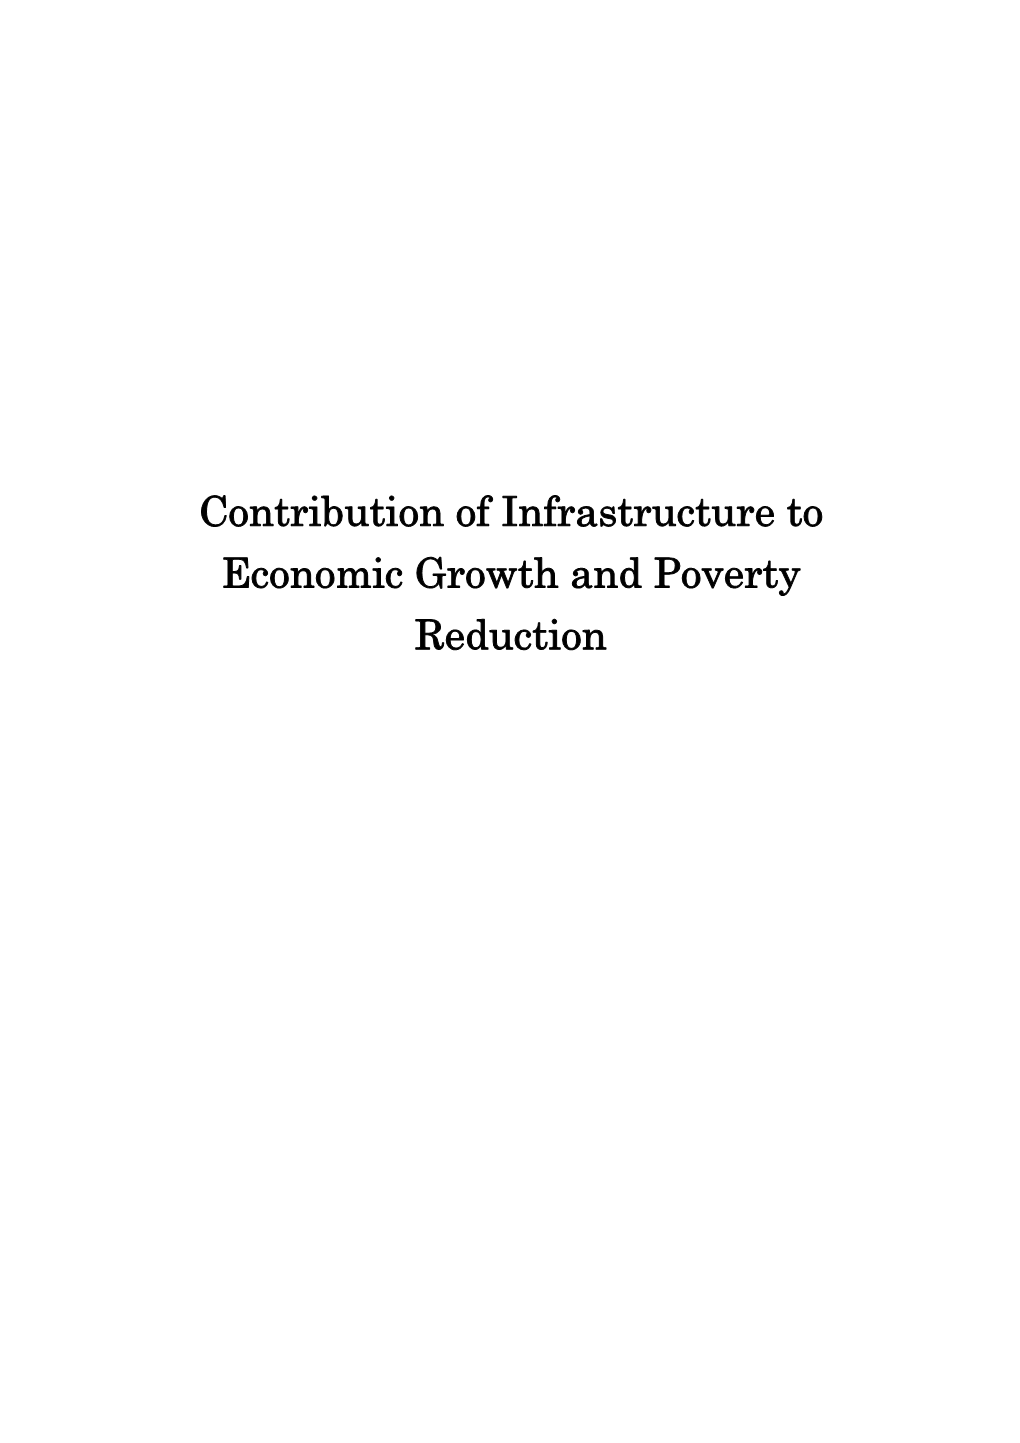 Contribution of Infrastructure to Economic Growth and Poverty Reduction